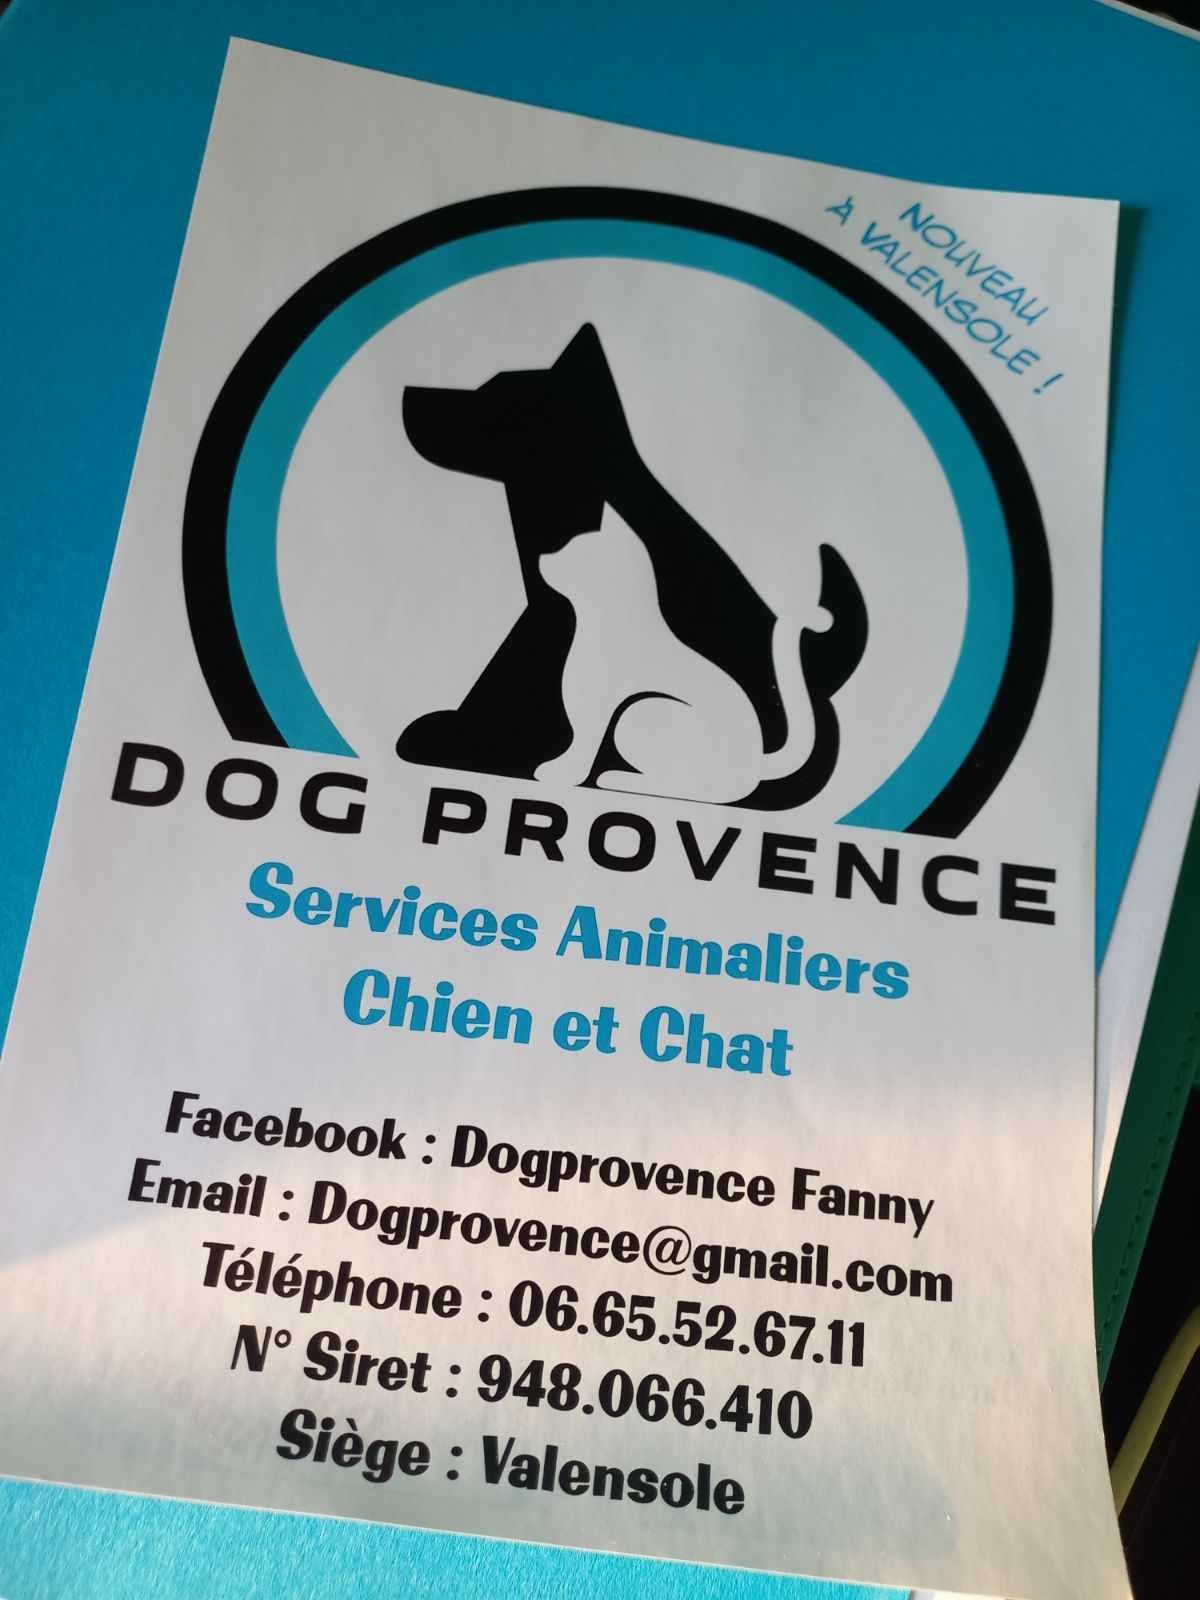 Dogs provence fannuy